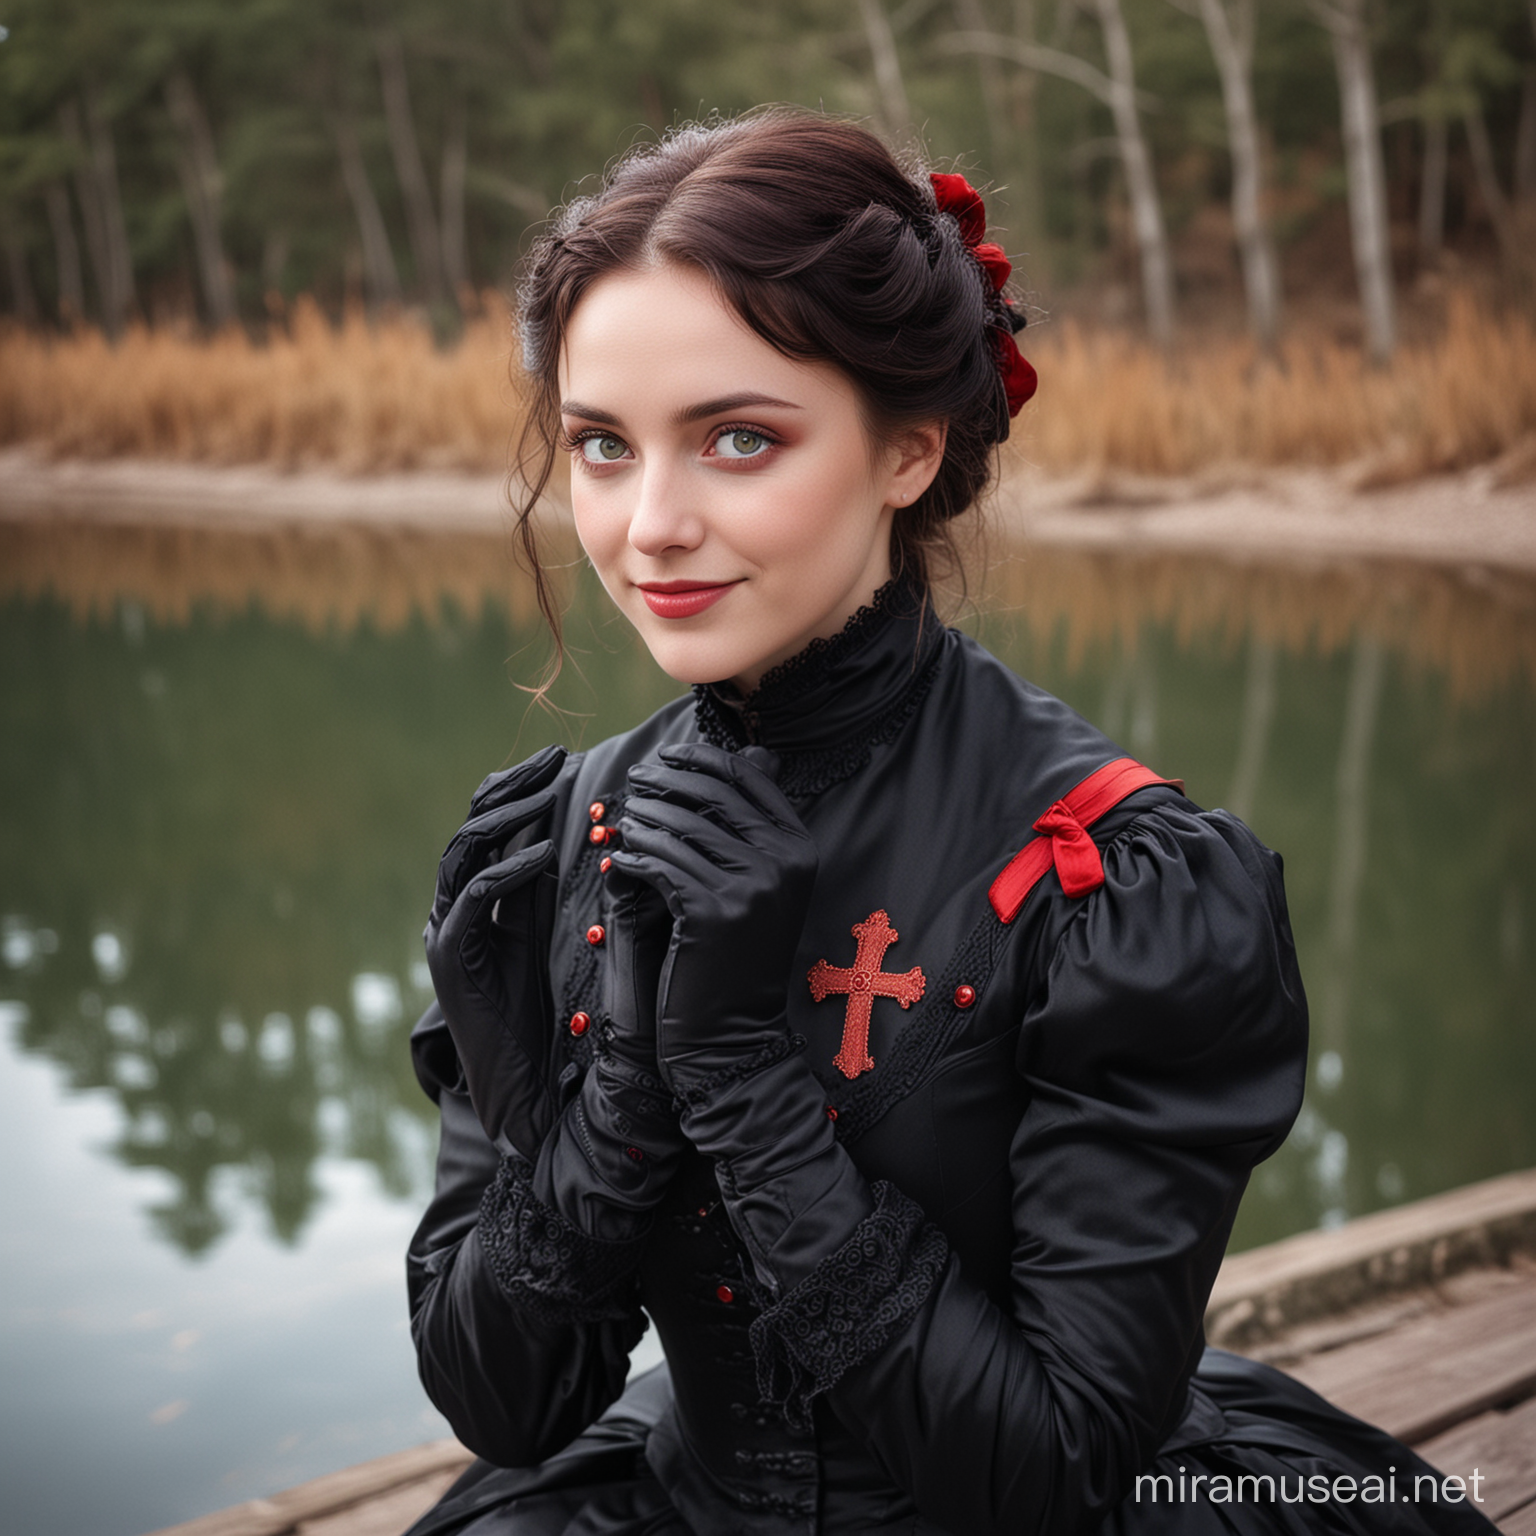 Victorian Woman with Heterochromia Smiling by Lake